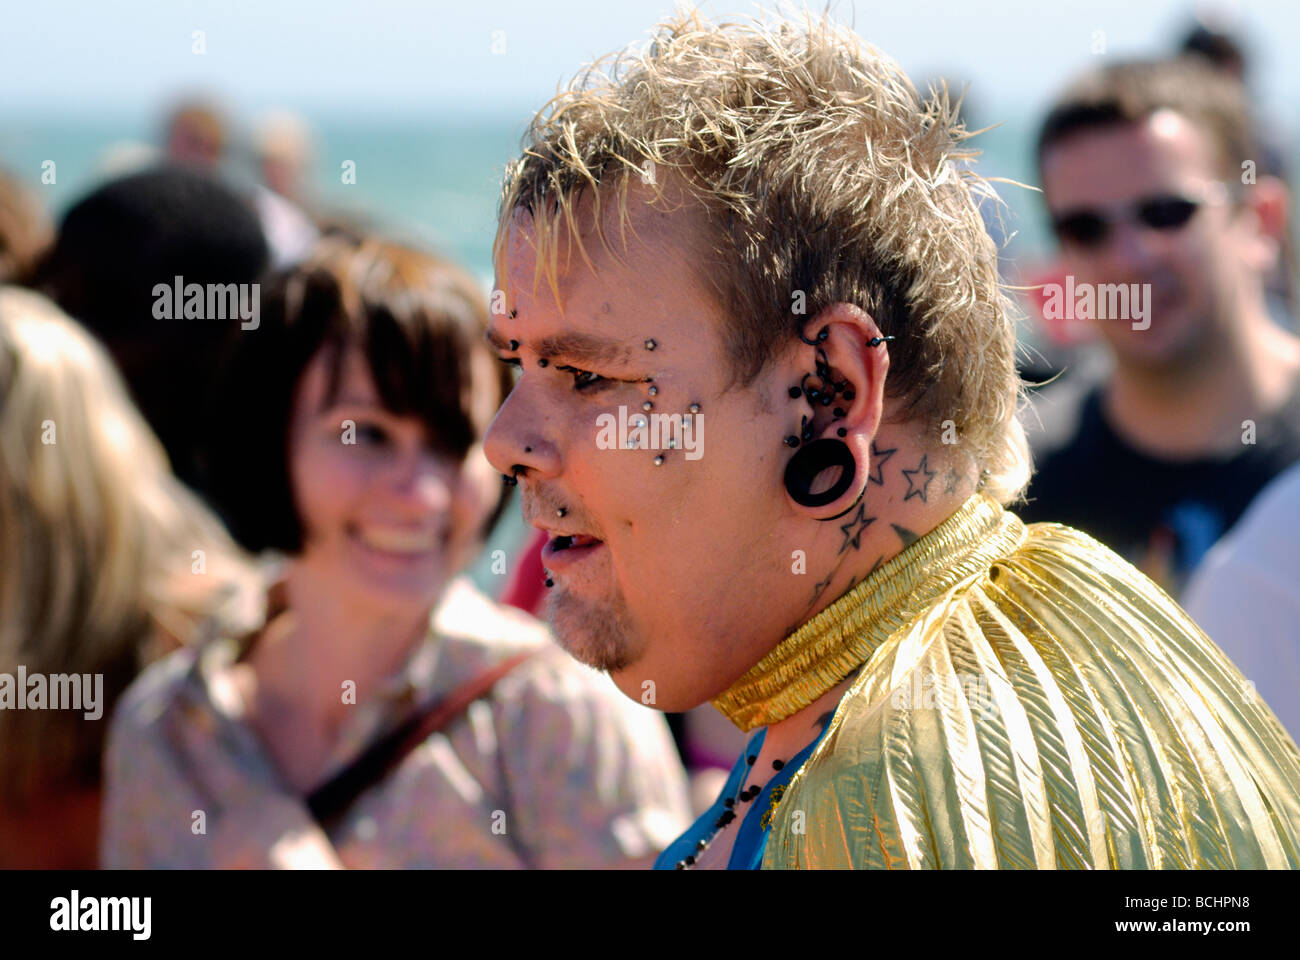 Man with tattoos and piercings in street parade Stock Photo